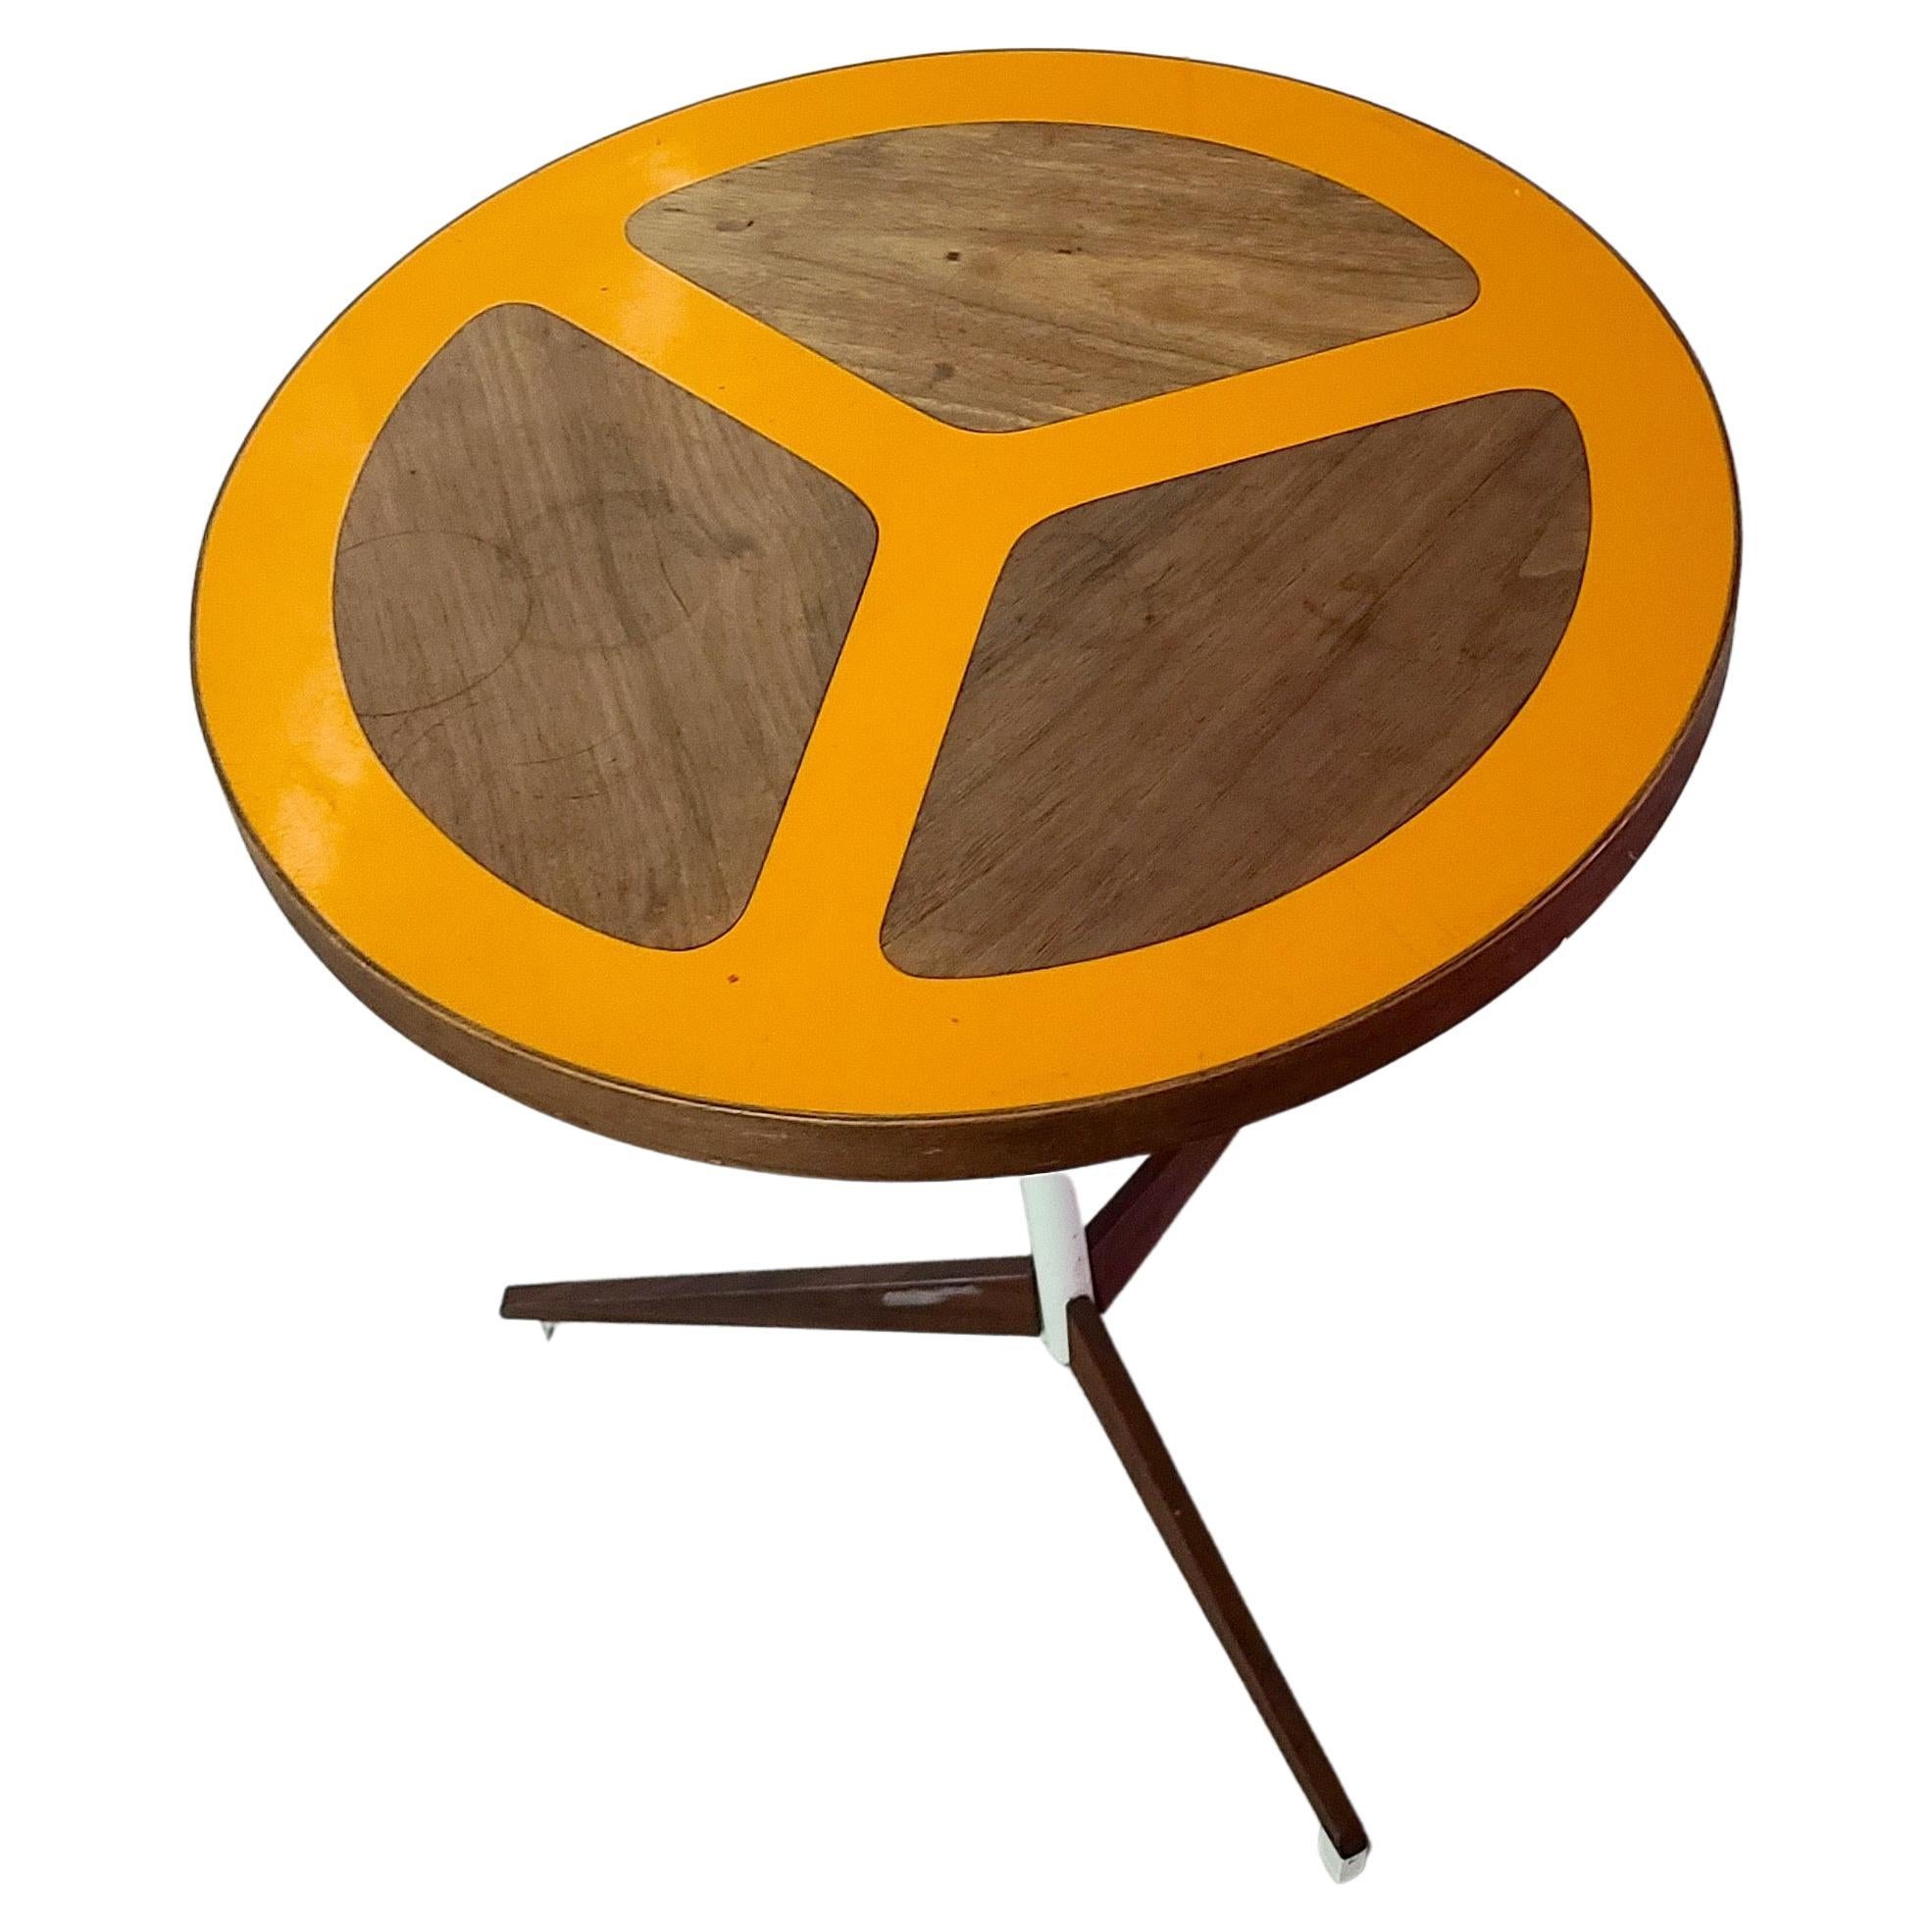 One Adjustable Table made by Peter Pepper Products. Designed by Don Savage and Howard McNab. Has an orange resin and walnut top in denoting a peace symbol. Shown in images as a unique table from an original set. This sale is for one table. Includes